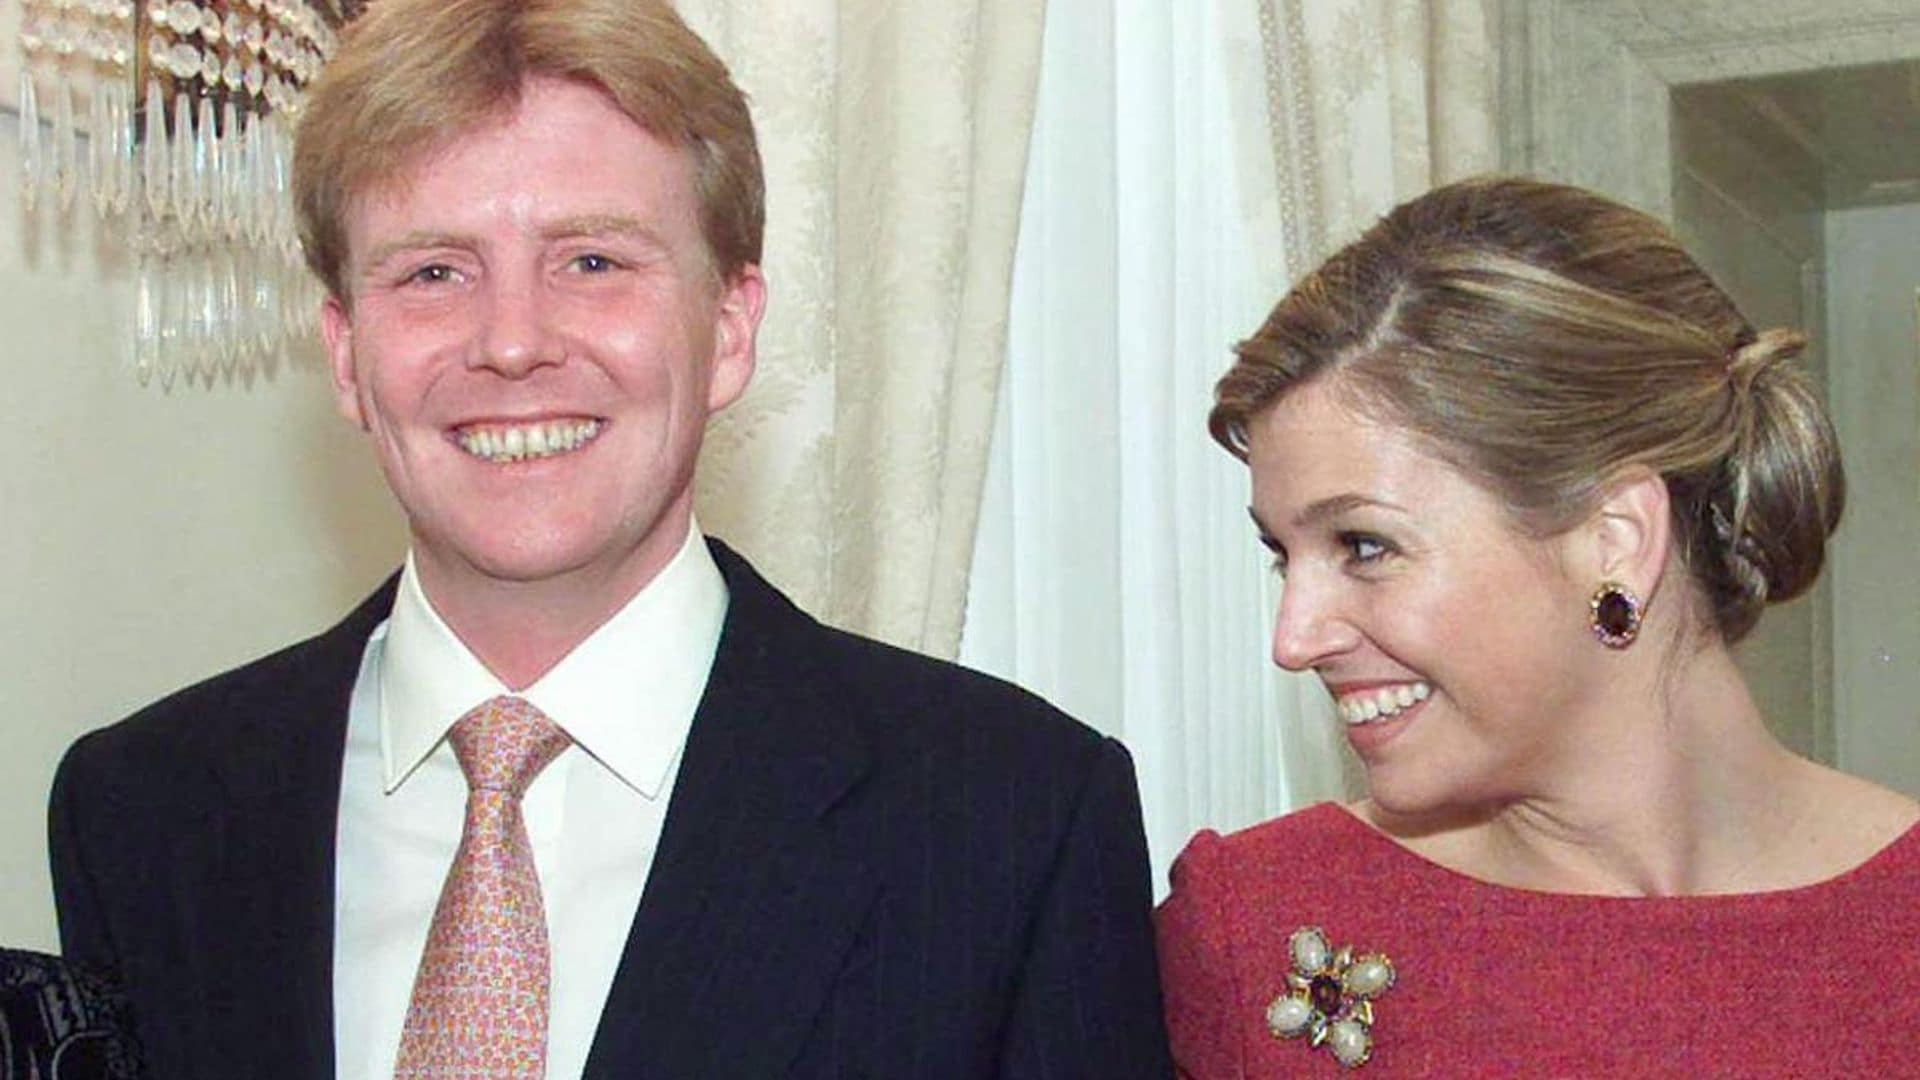 King Willem-Alexander recalls meeting wife and confirms ‘circumstances required’ daughter Amalia to live in Spain